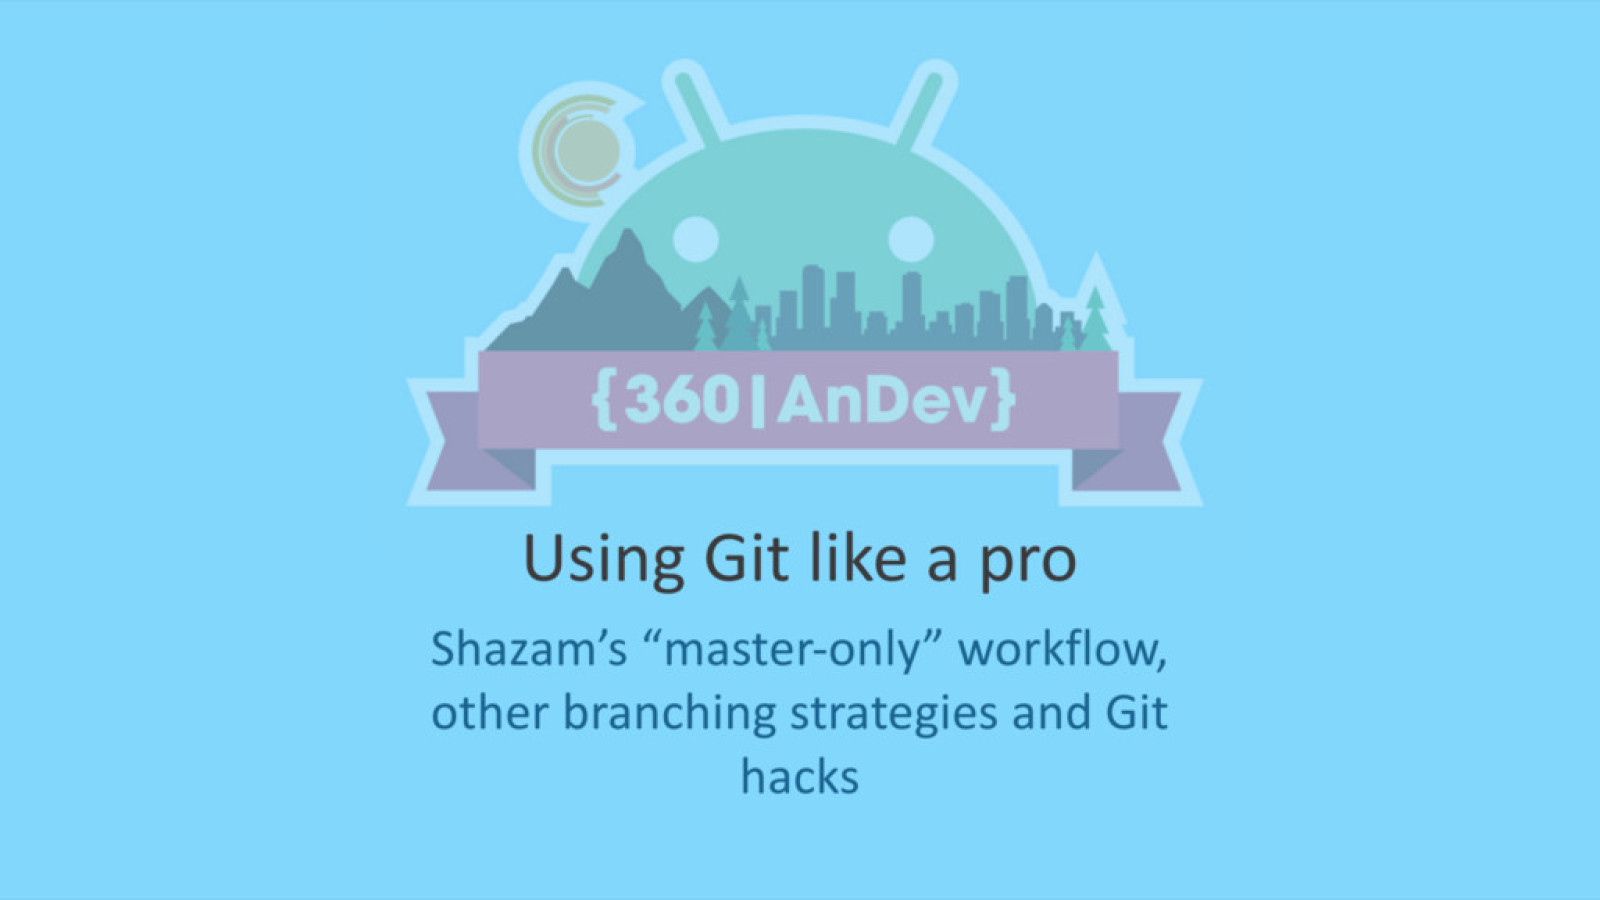 Using Git like a pro: Shazam's "master-only" workflow, other branching strategies and Git hacks